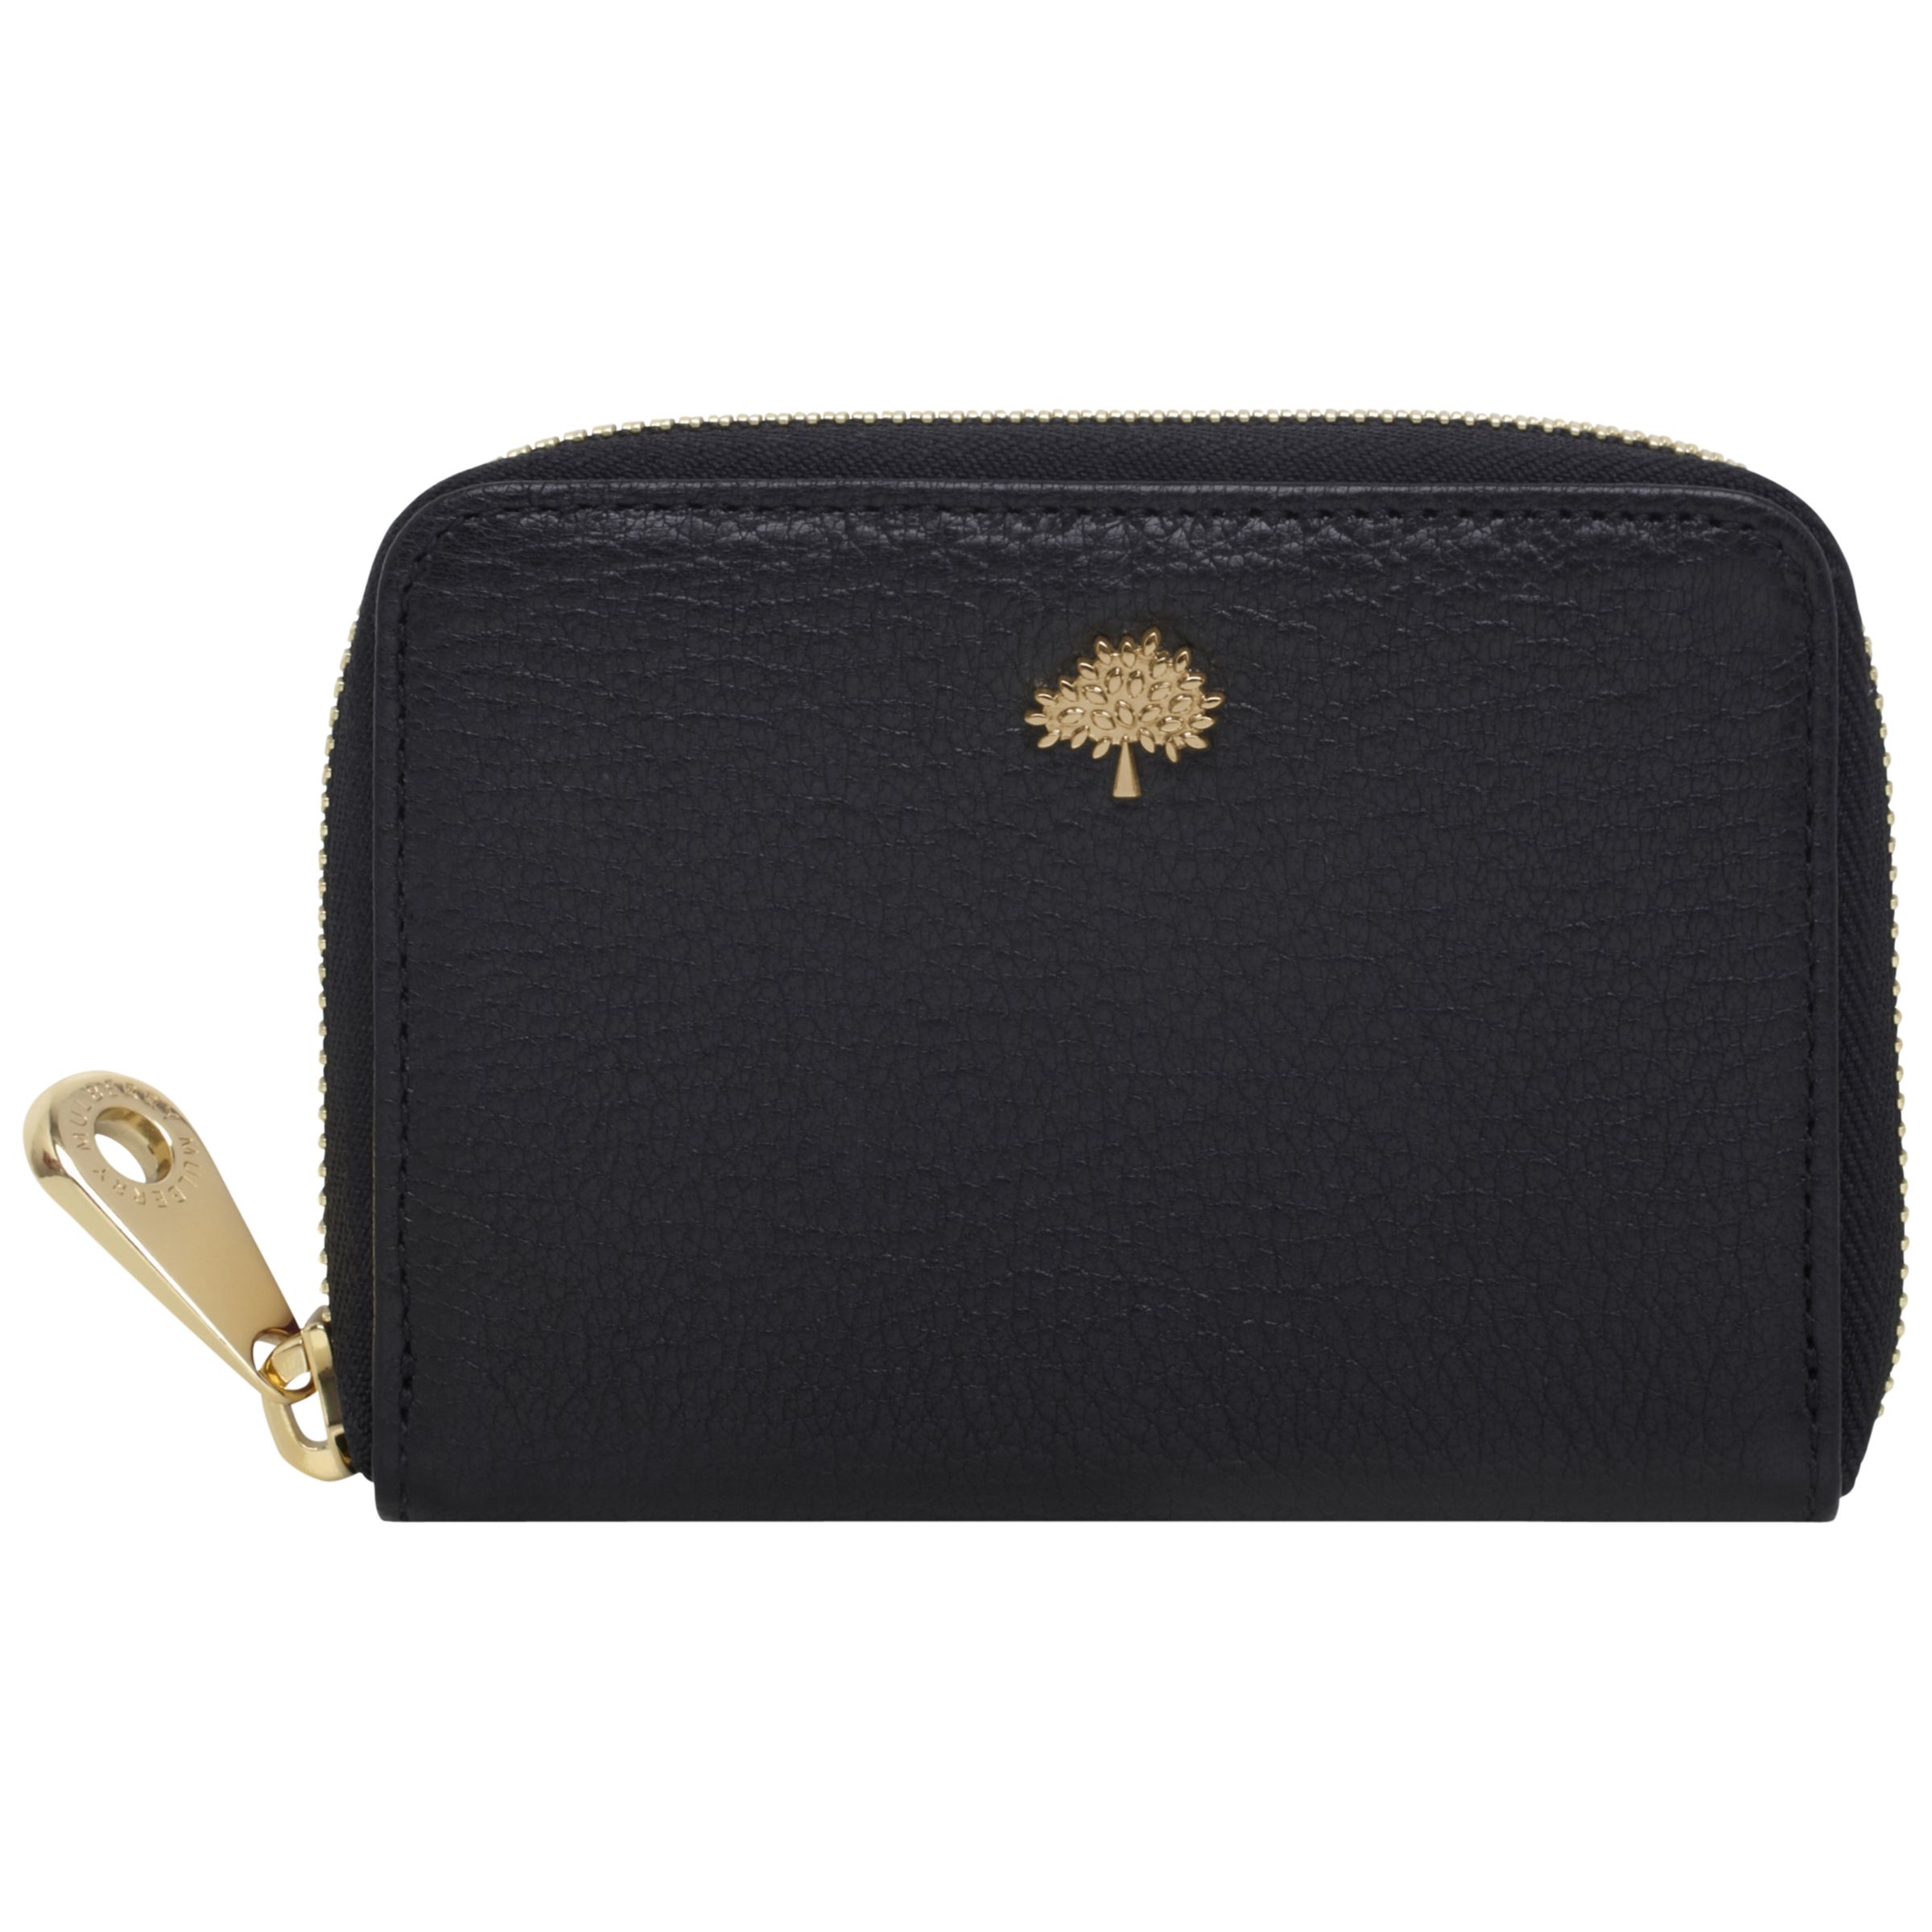 Mulberry Tree Zip Around Leather Purse at John Lewis & Partners